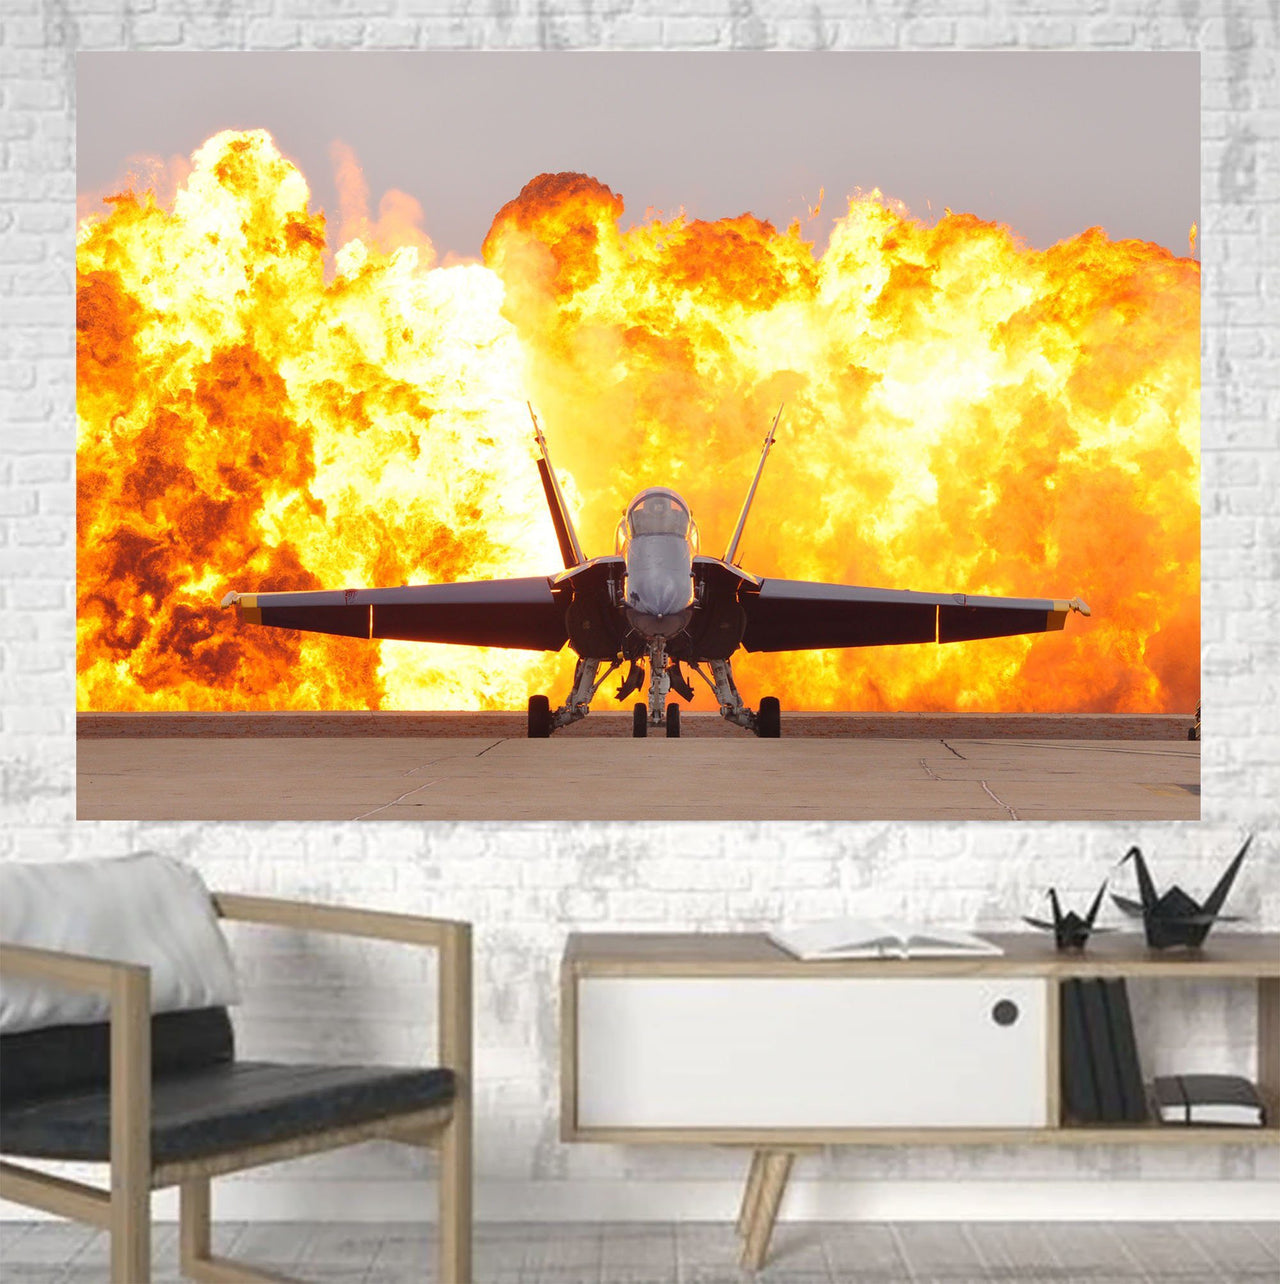 Face to Face with Air Force Jet & Flames Printed Canvas Posters (1 Piece) Aviation Shop 